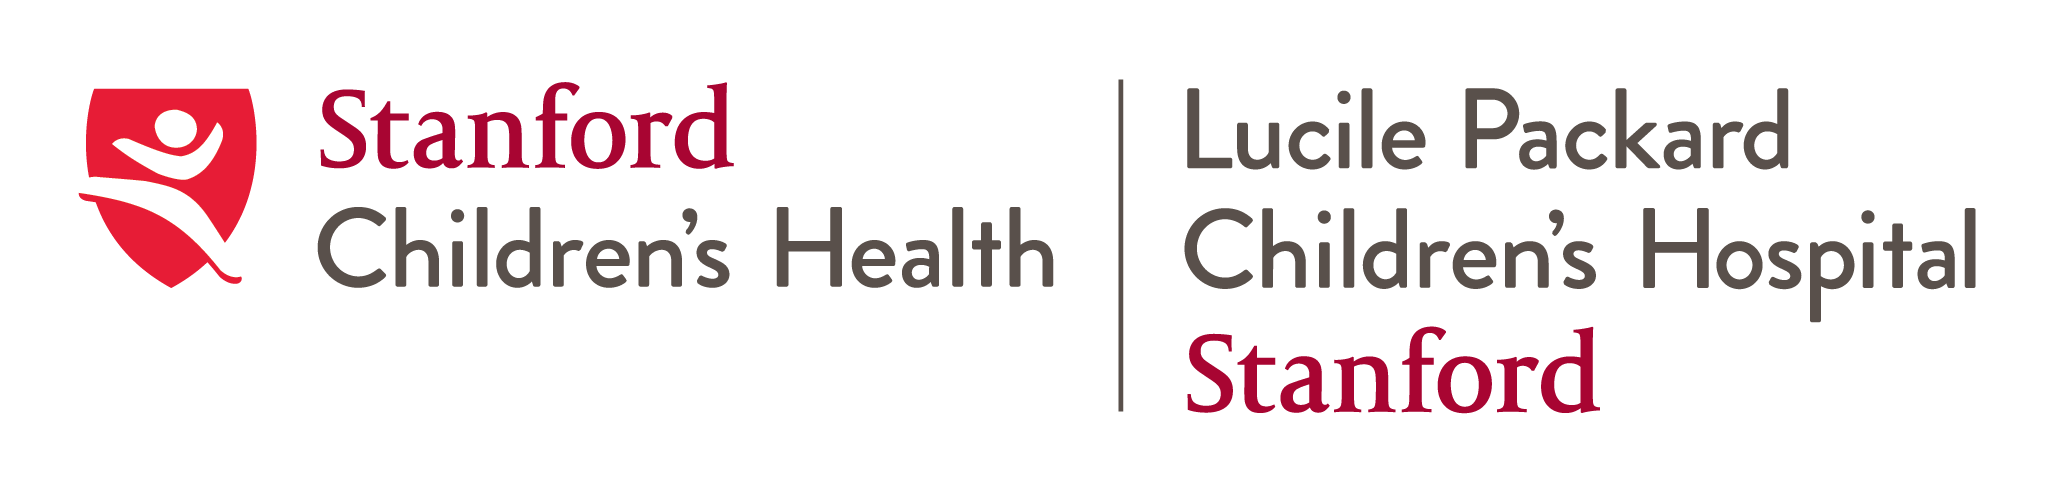 Brand Guidelines and Logos - Stanford Children's Health